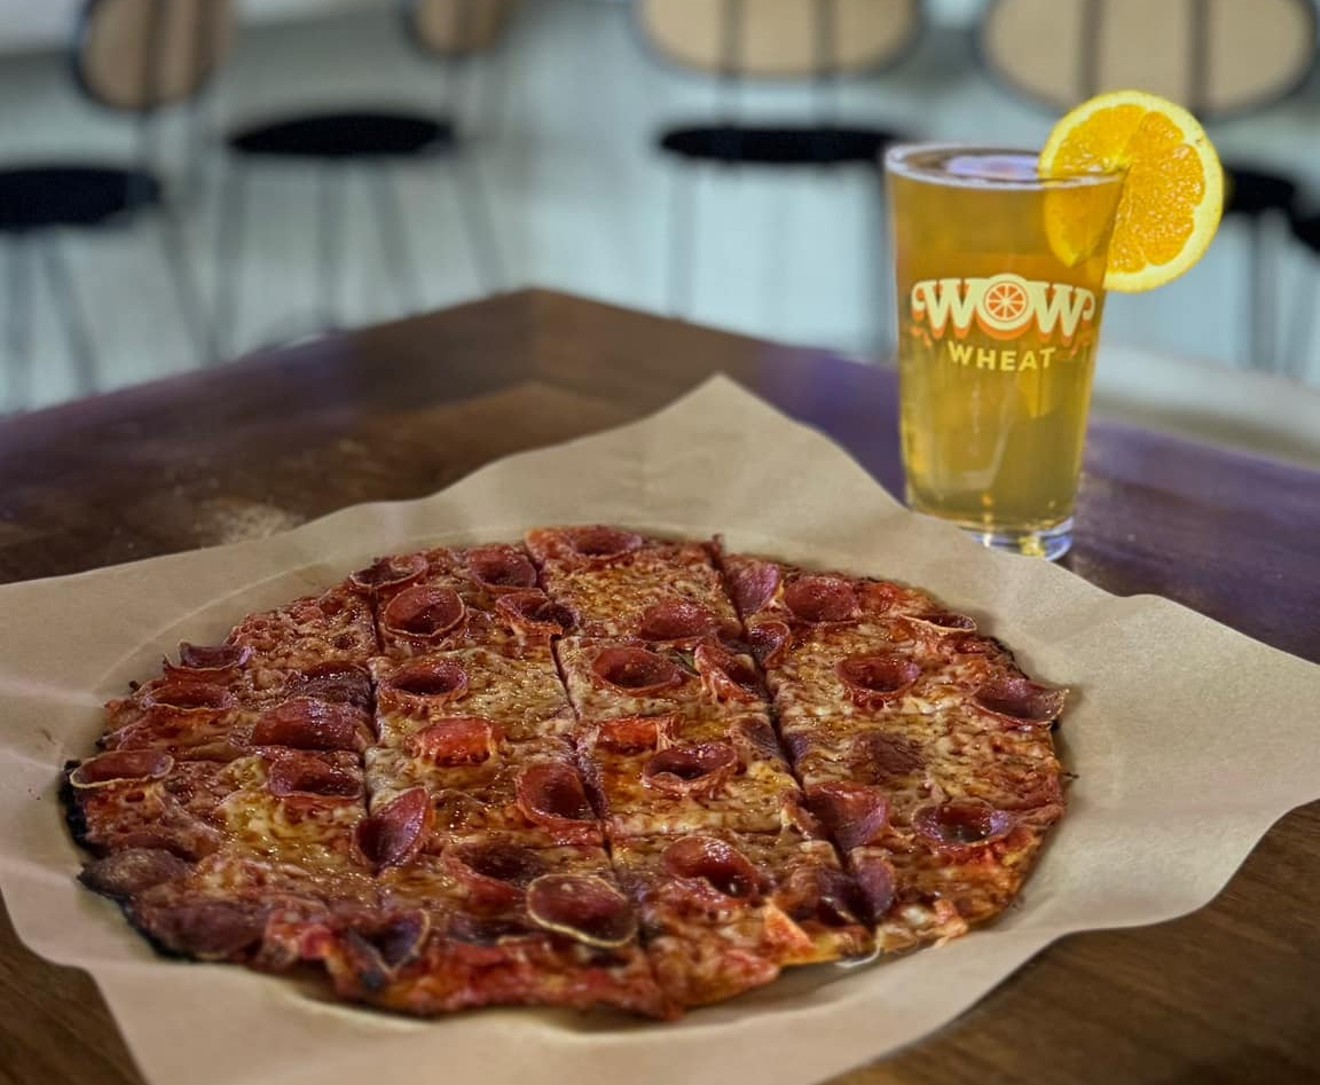 A pizzeria serving tavern-style pies, pints and craft cocktails has debuted in the former Teddy's Preserve space. Moon Pie Pizza & Patio debuted on Roosevelt Row on March 18.